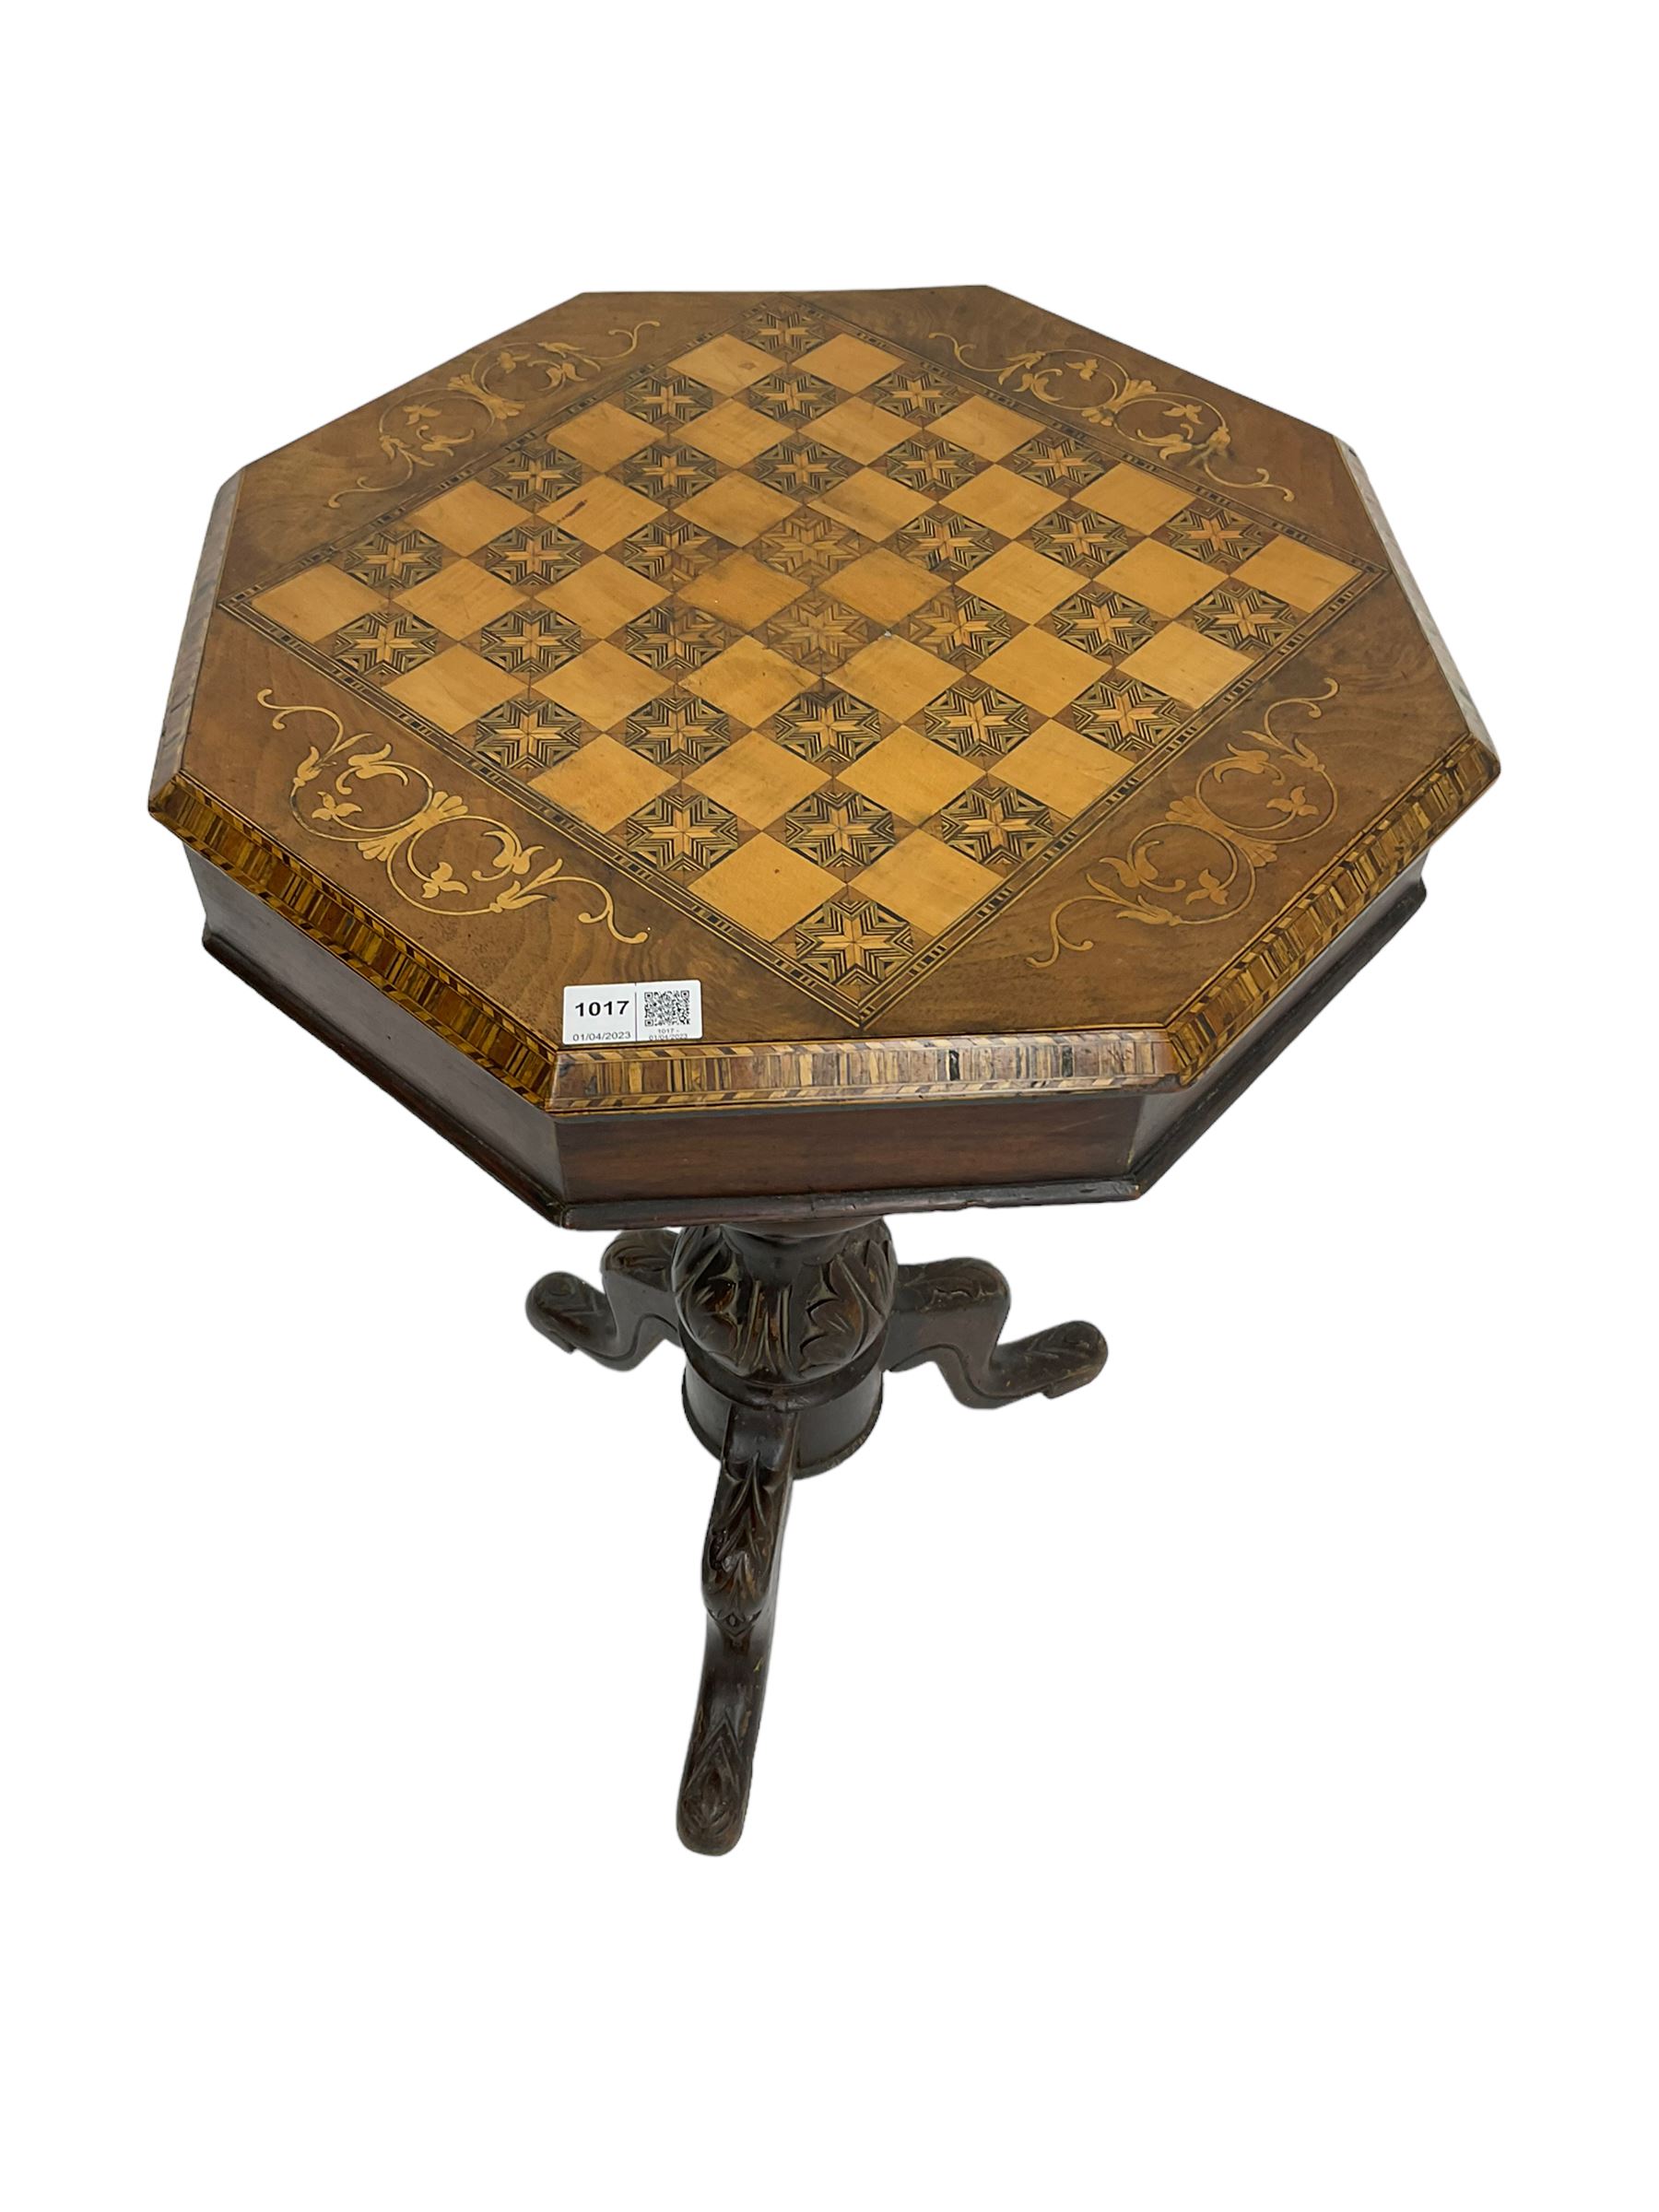 Late 19th century inlaid walnut sewing or work table - Image 2 of 6